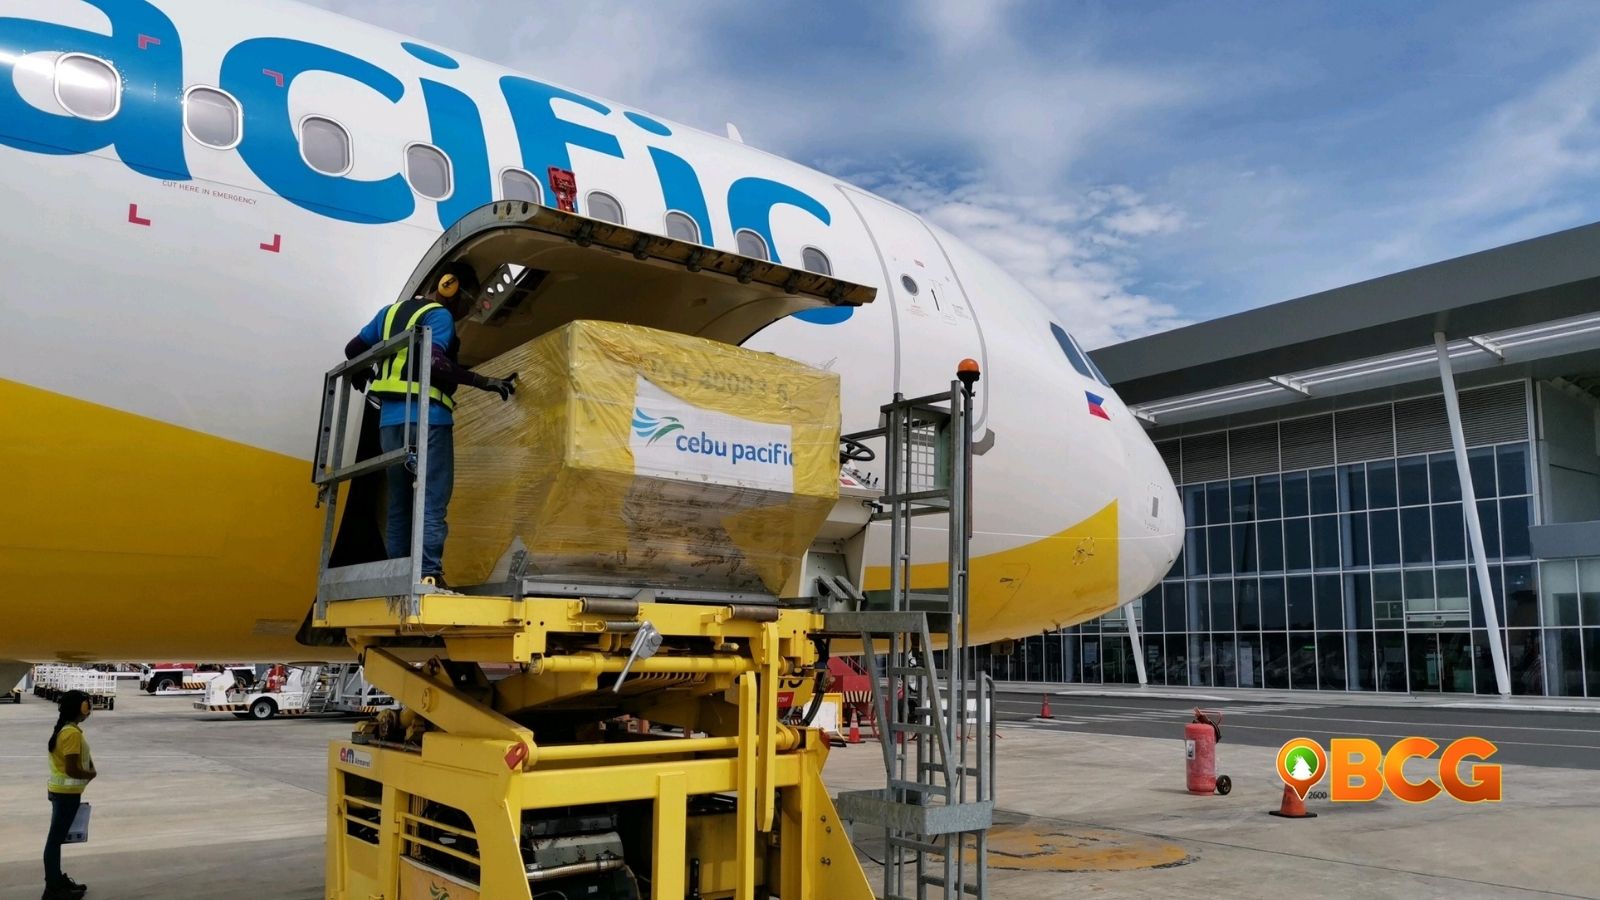 Loading the Vaccines on a Cebu Pacific plane